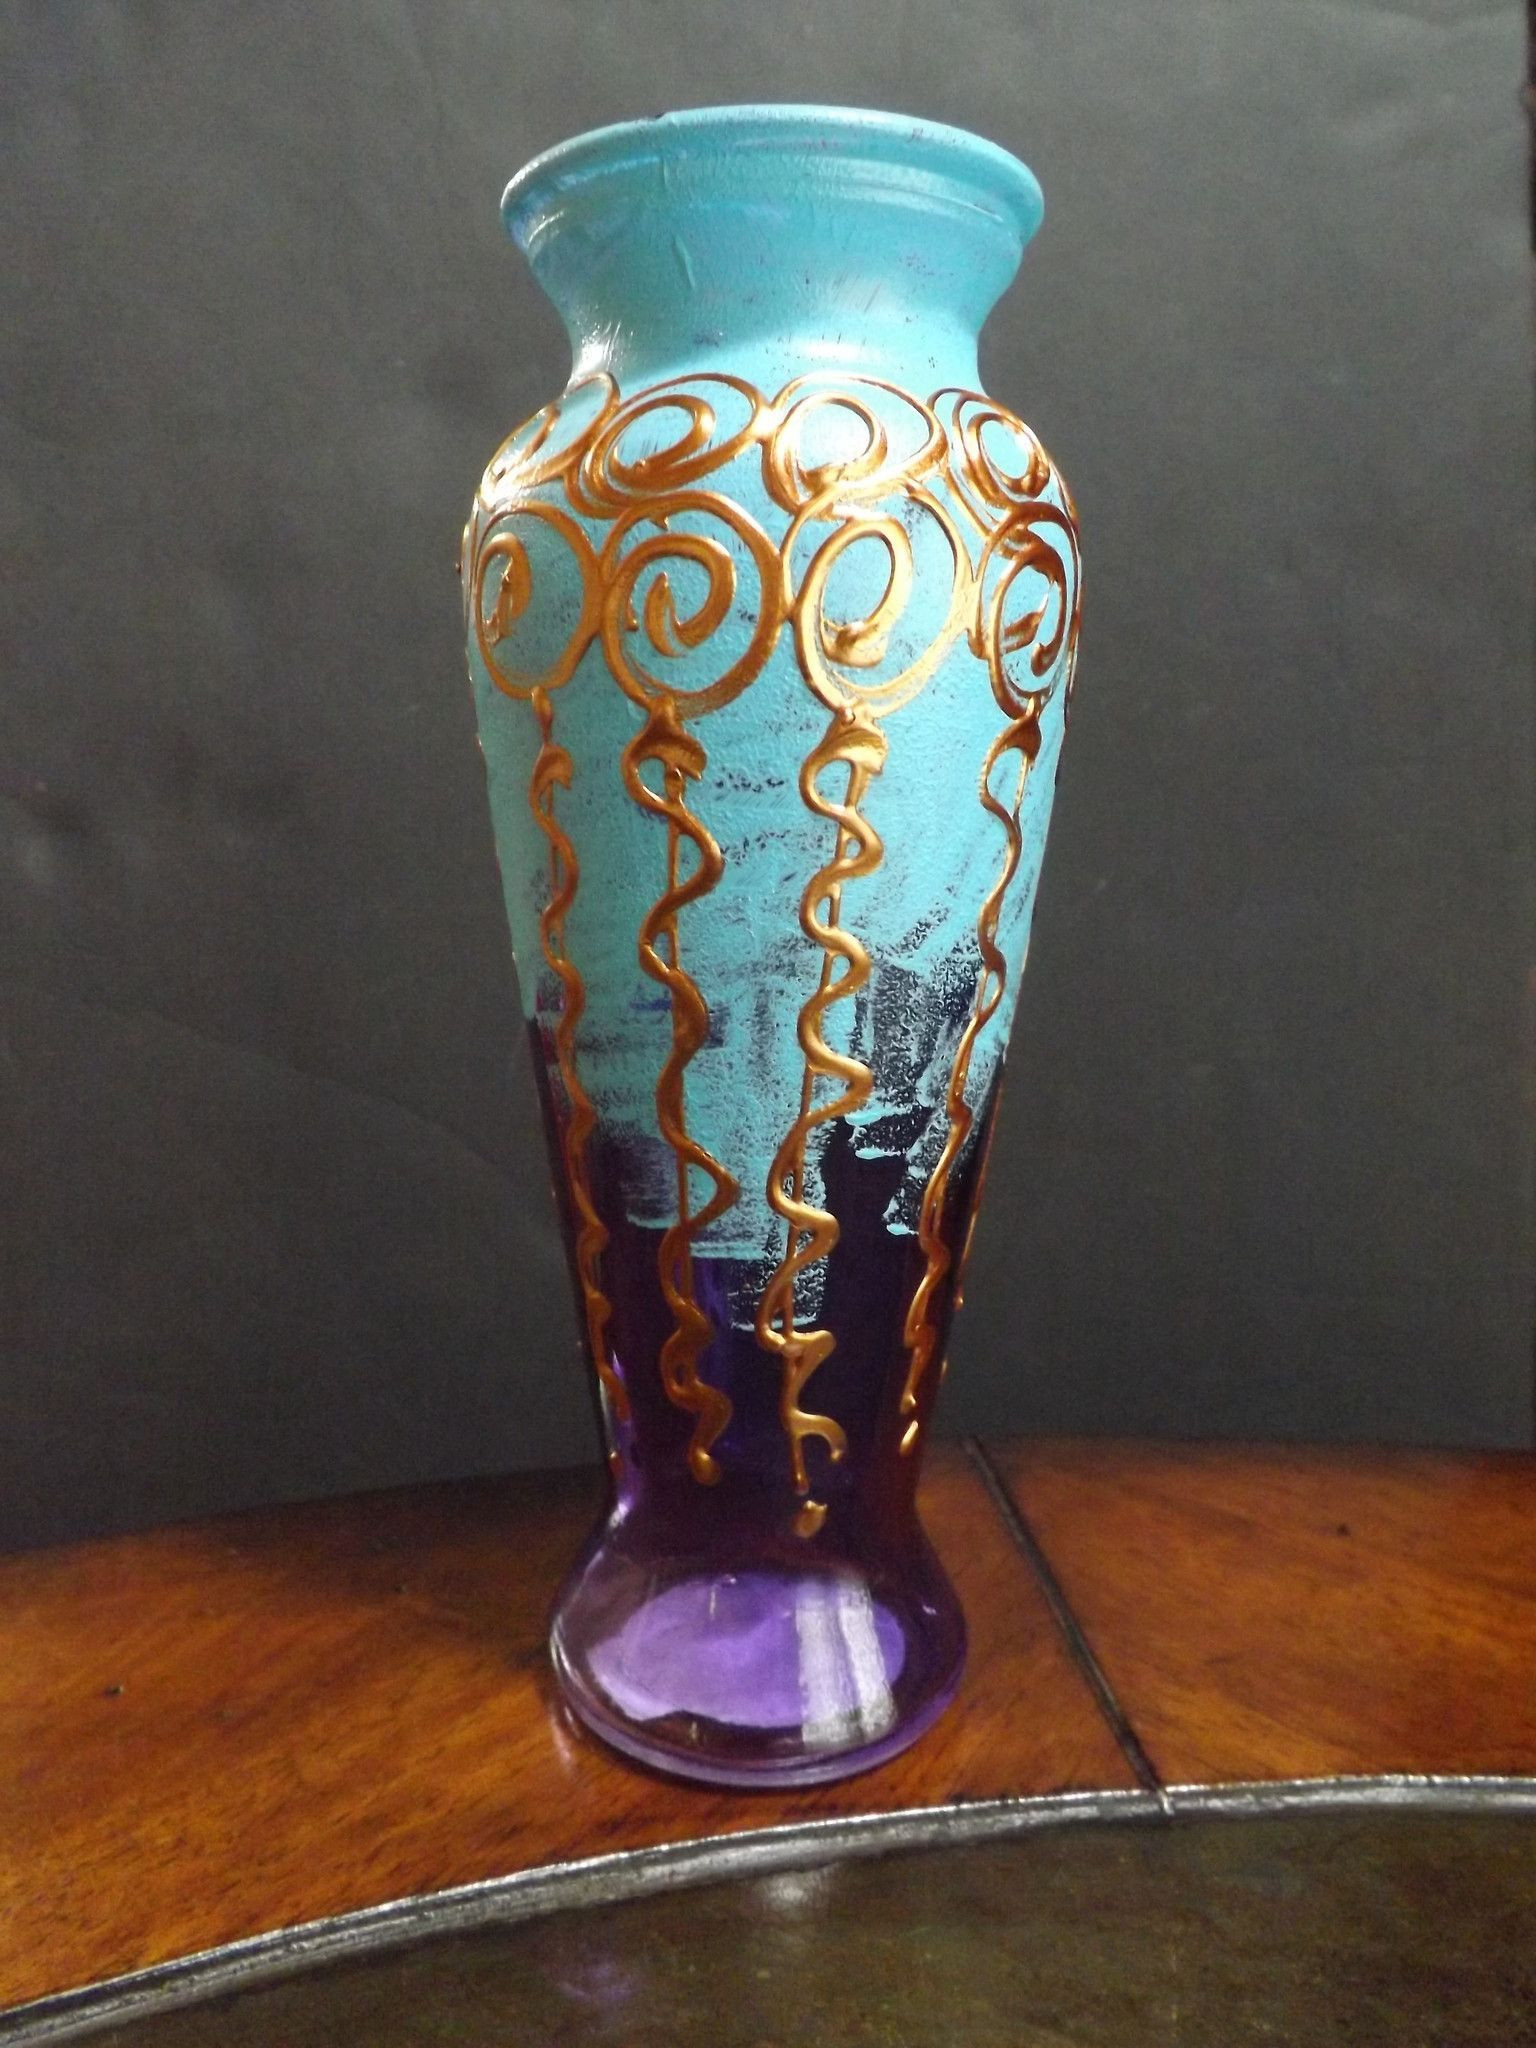 19 Fabulous Purple Swirl Vase 2023 free download purple swirl vase of icy blue and gold and purple vase buyable wants pinterest regarding icy blue and gold and purple vase buyable wants pinterest products blue and and blues